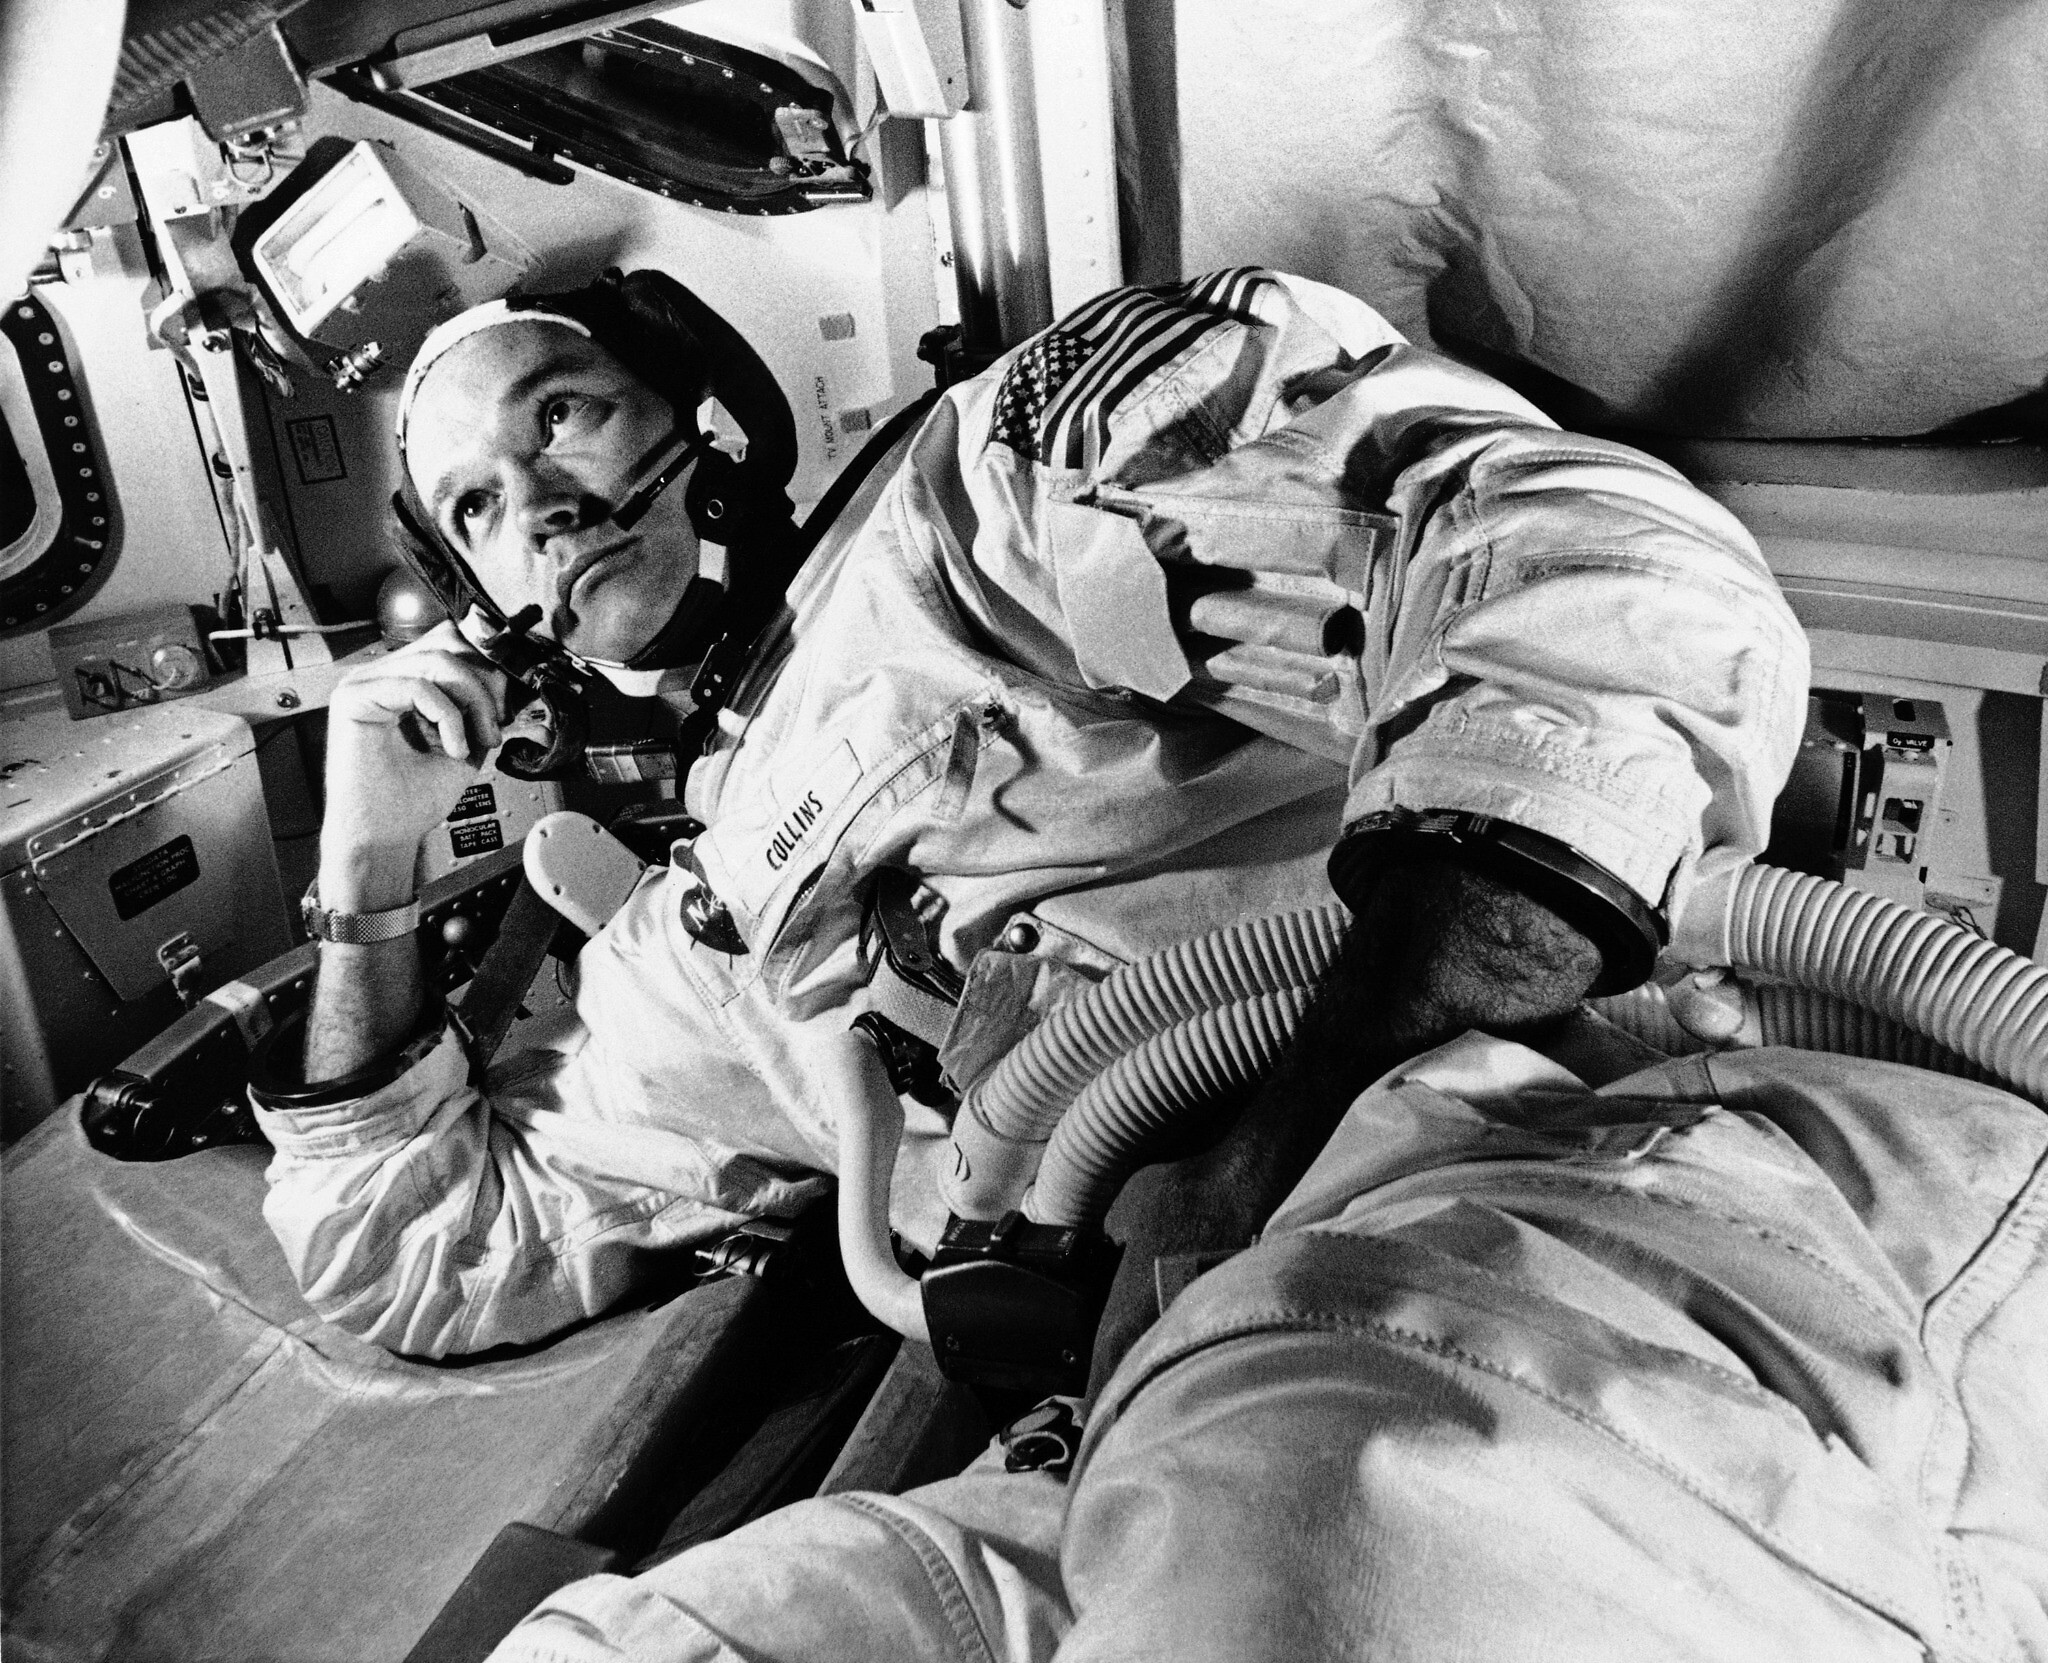 How many astronauts have died in space?